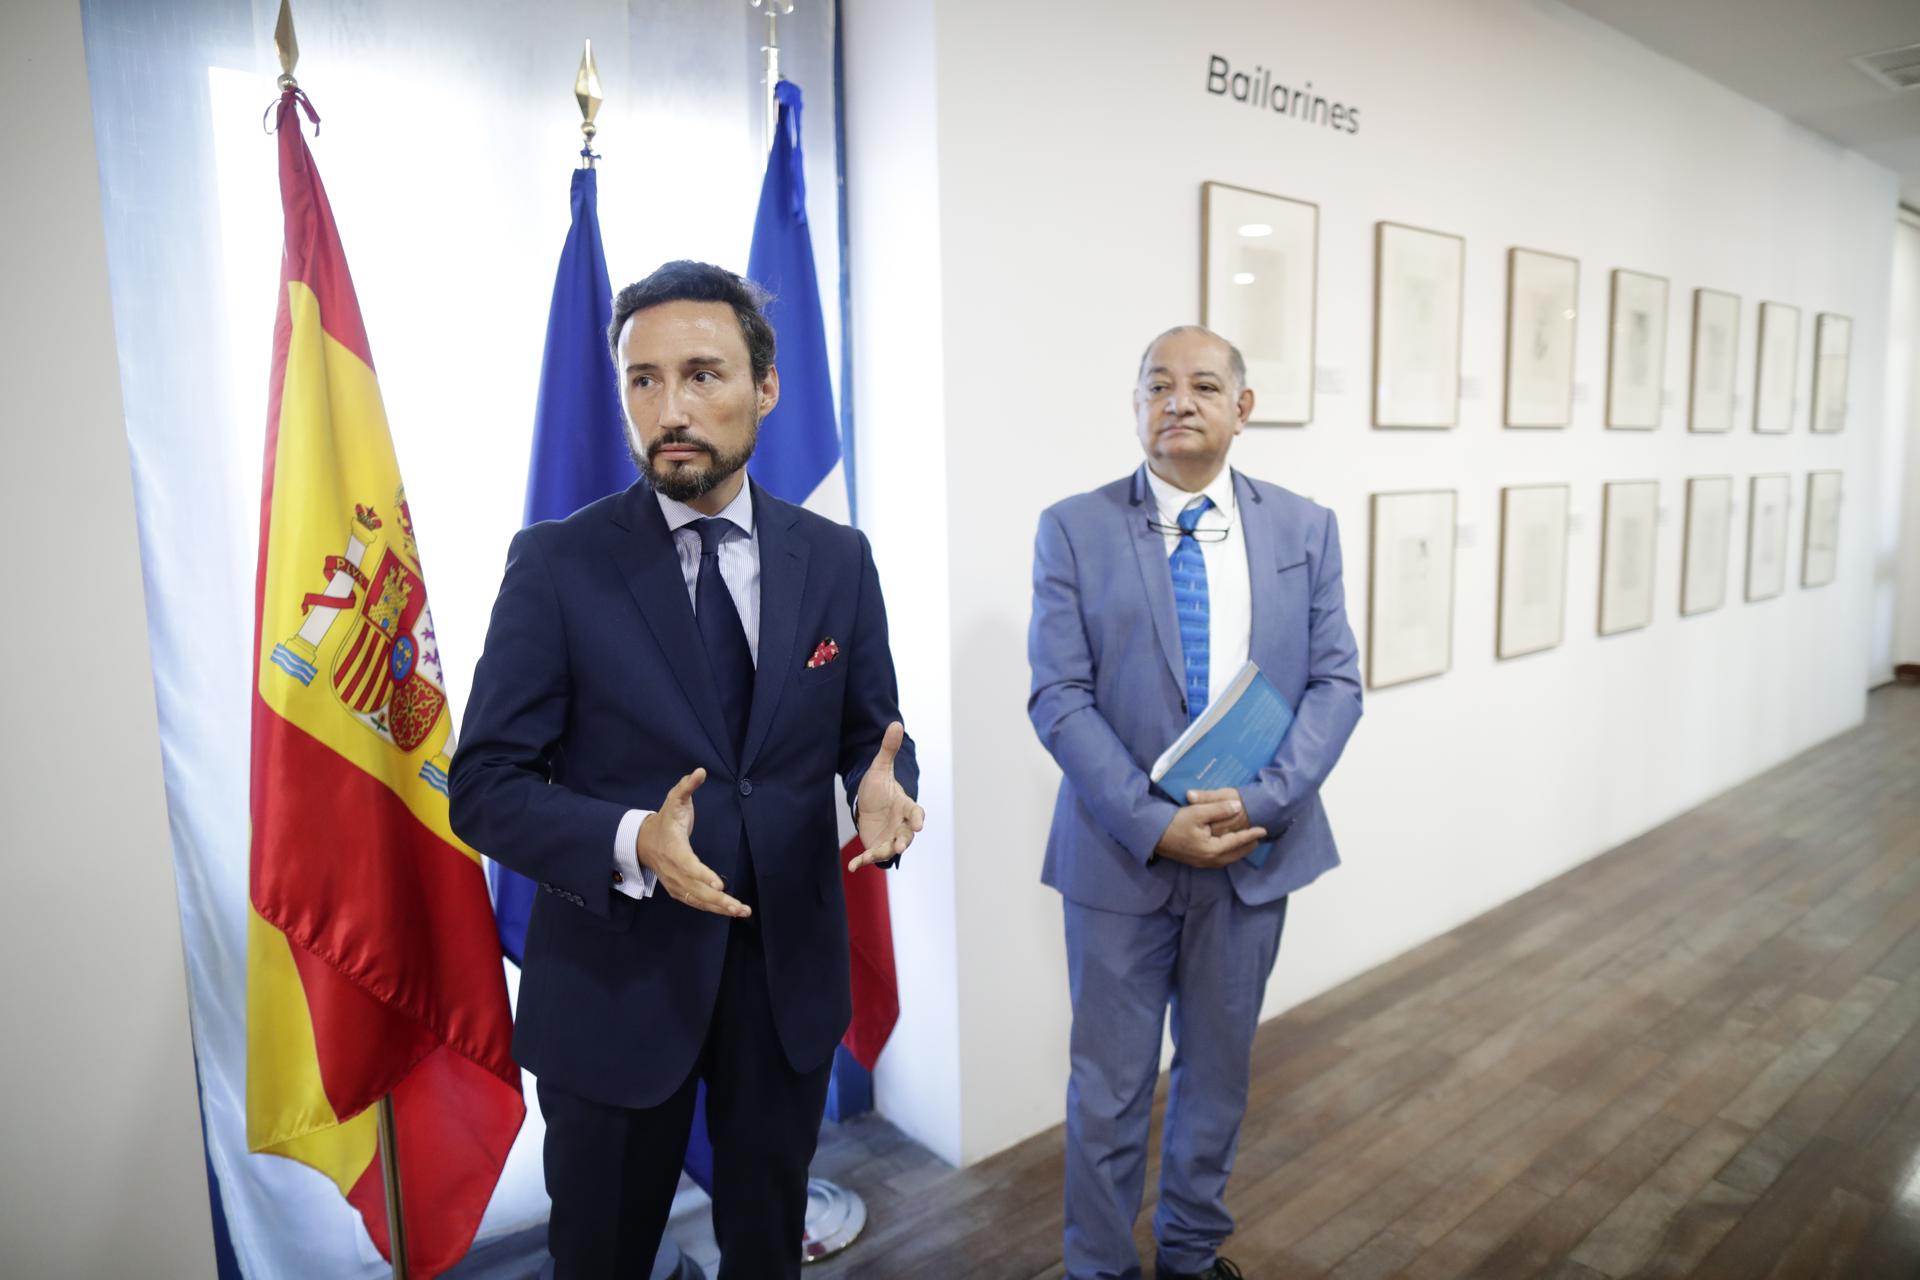 The Ambassador of Spain in Panama, Guzmán Palacios (c), speaks during the inauguration of the exhibition of 40 original lithographs by Pablo Picasso, at the Cultural Center of Spain, Casa del Soldado, in Panama City, Panama, 05 June 2023. EFE / Bienvenido Velasco
